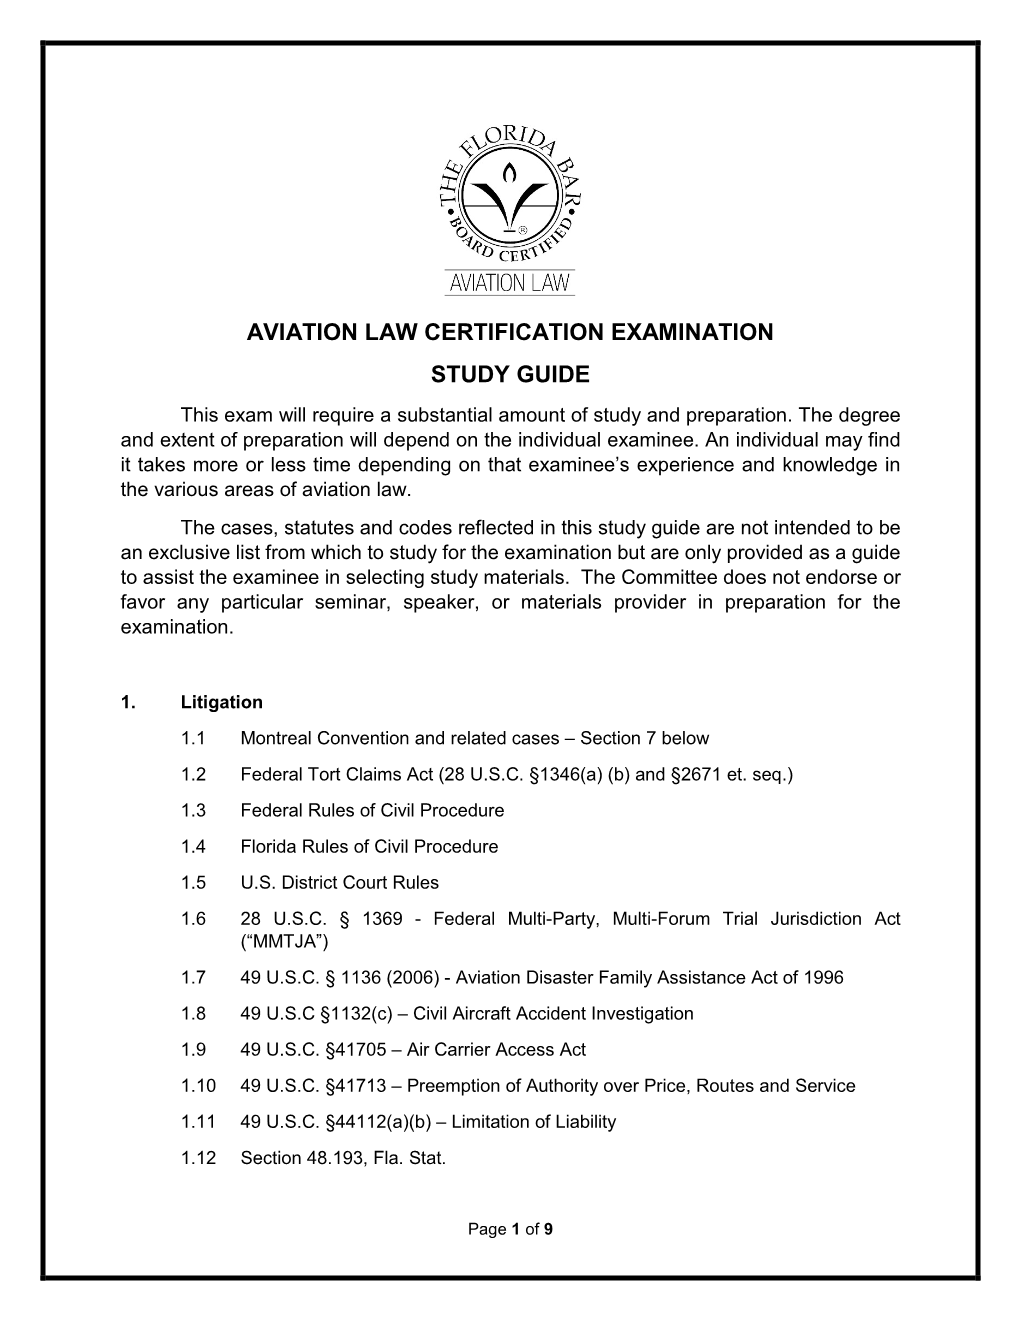 AVIATION LAW CERTIFICATION EXAMINATION STUDY GUIDE This Exam Will Require a Substantial Amount of Study and Preparation